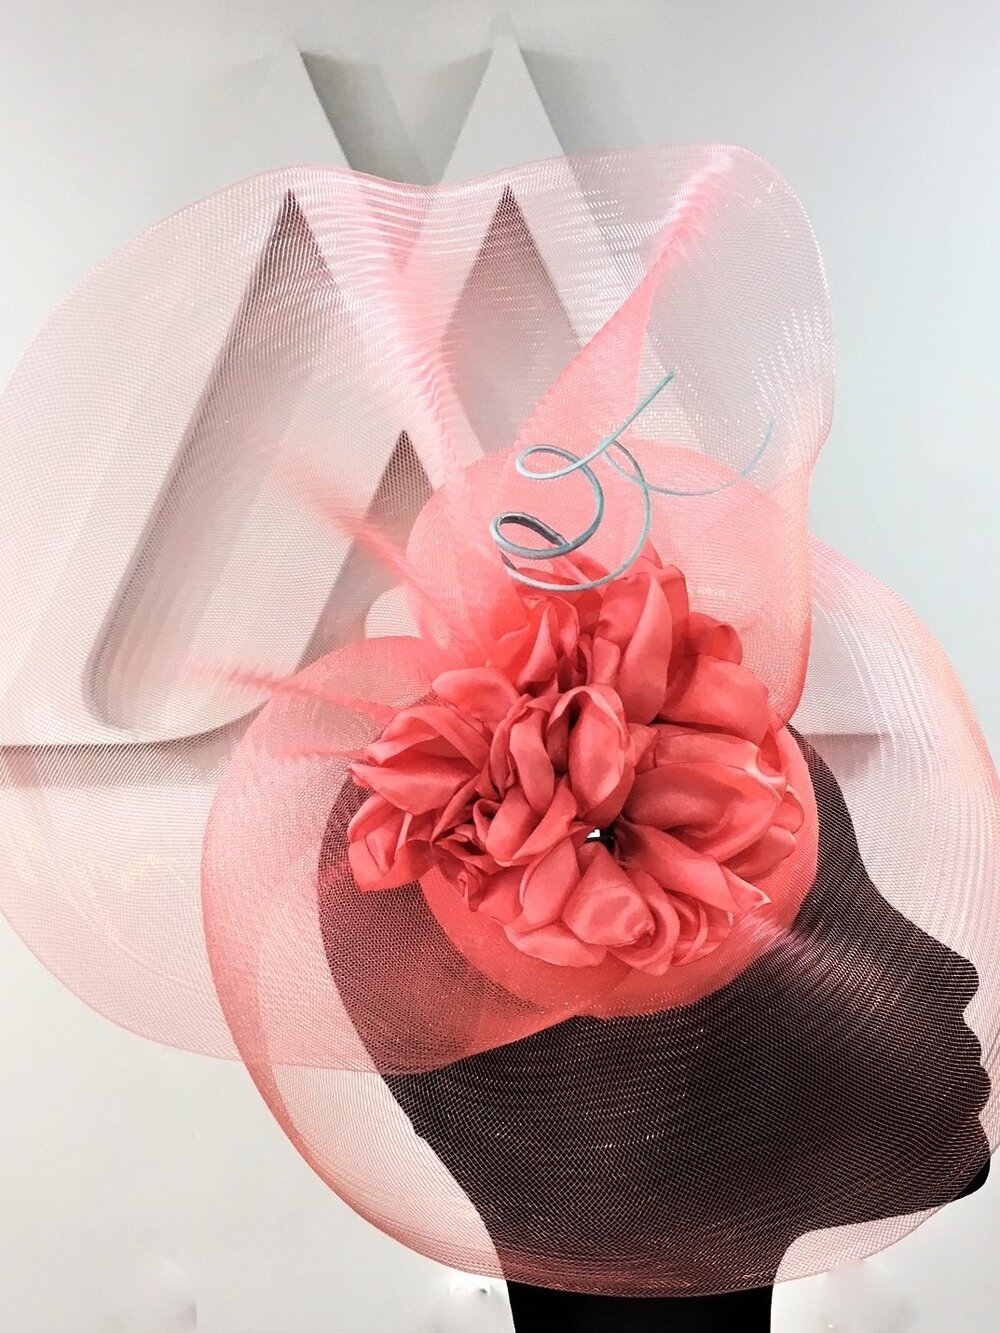 Lovely fascinators at Aisling Maher